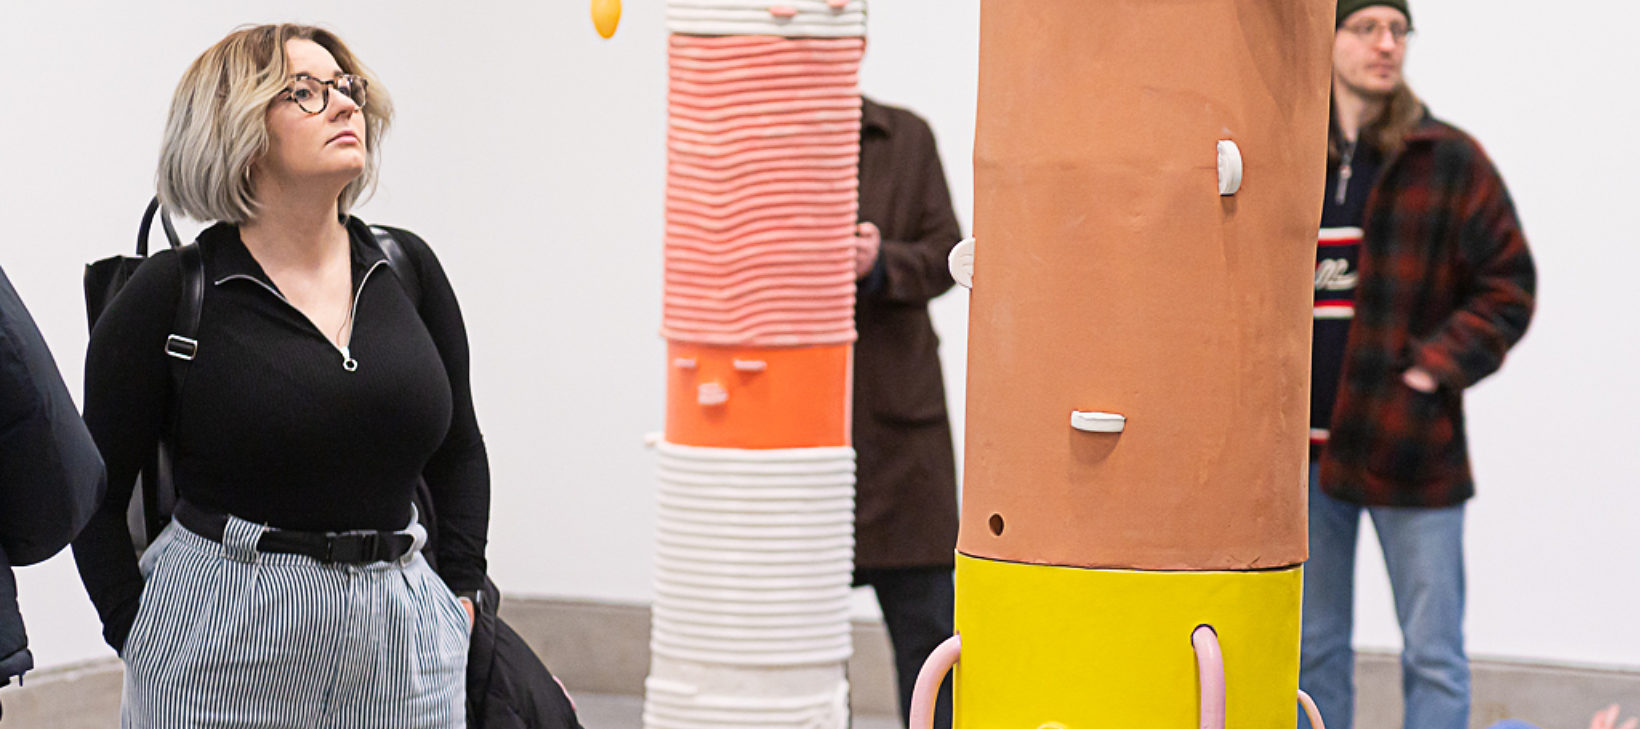 A woman wearing a black top and grey trousers looks up at a brown, black and yellow sculpture. There are two people in the background who are also looking the artwork.